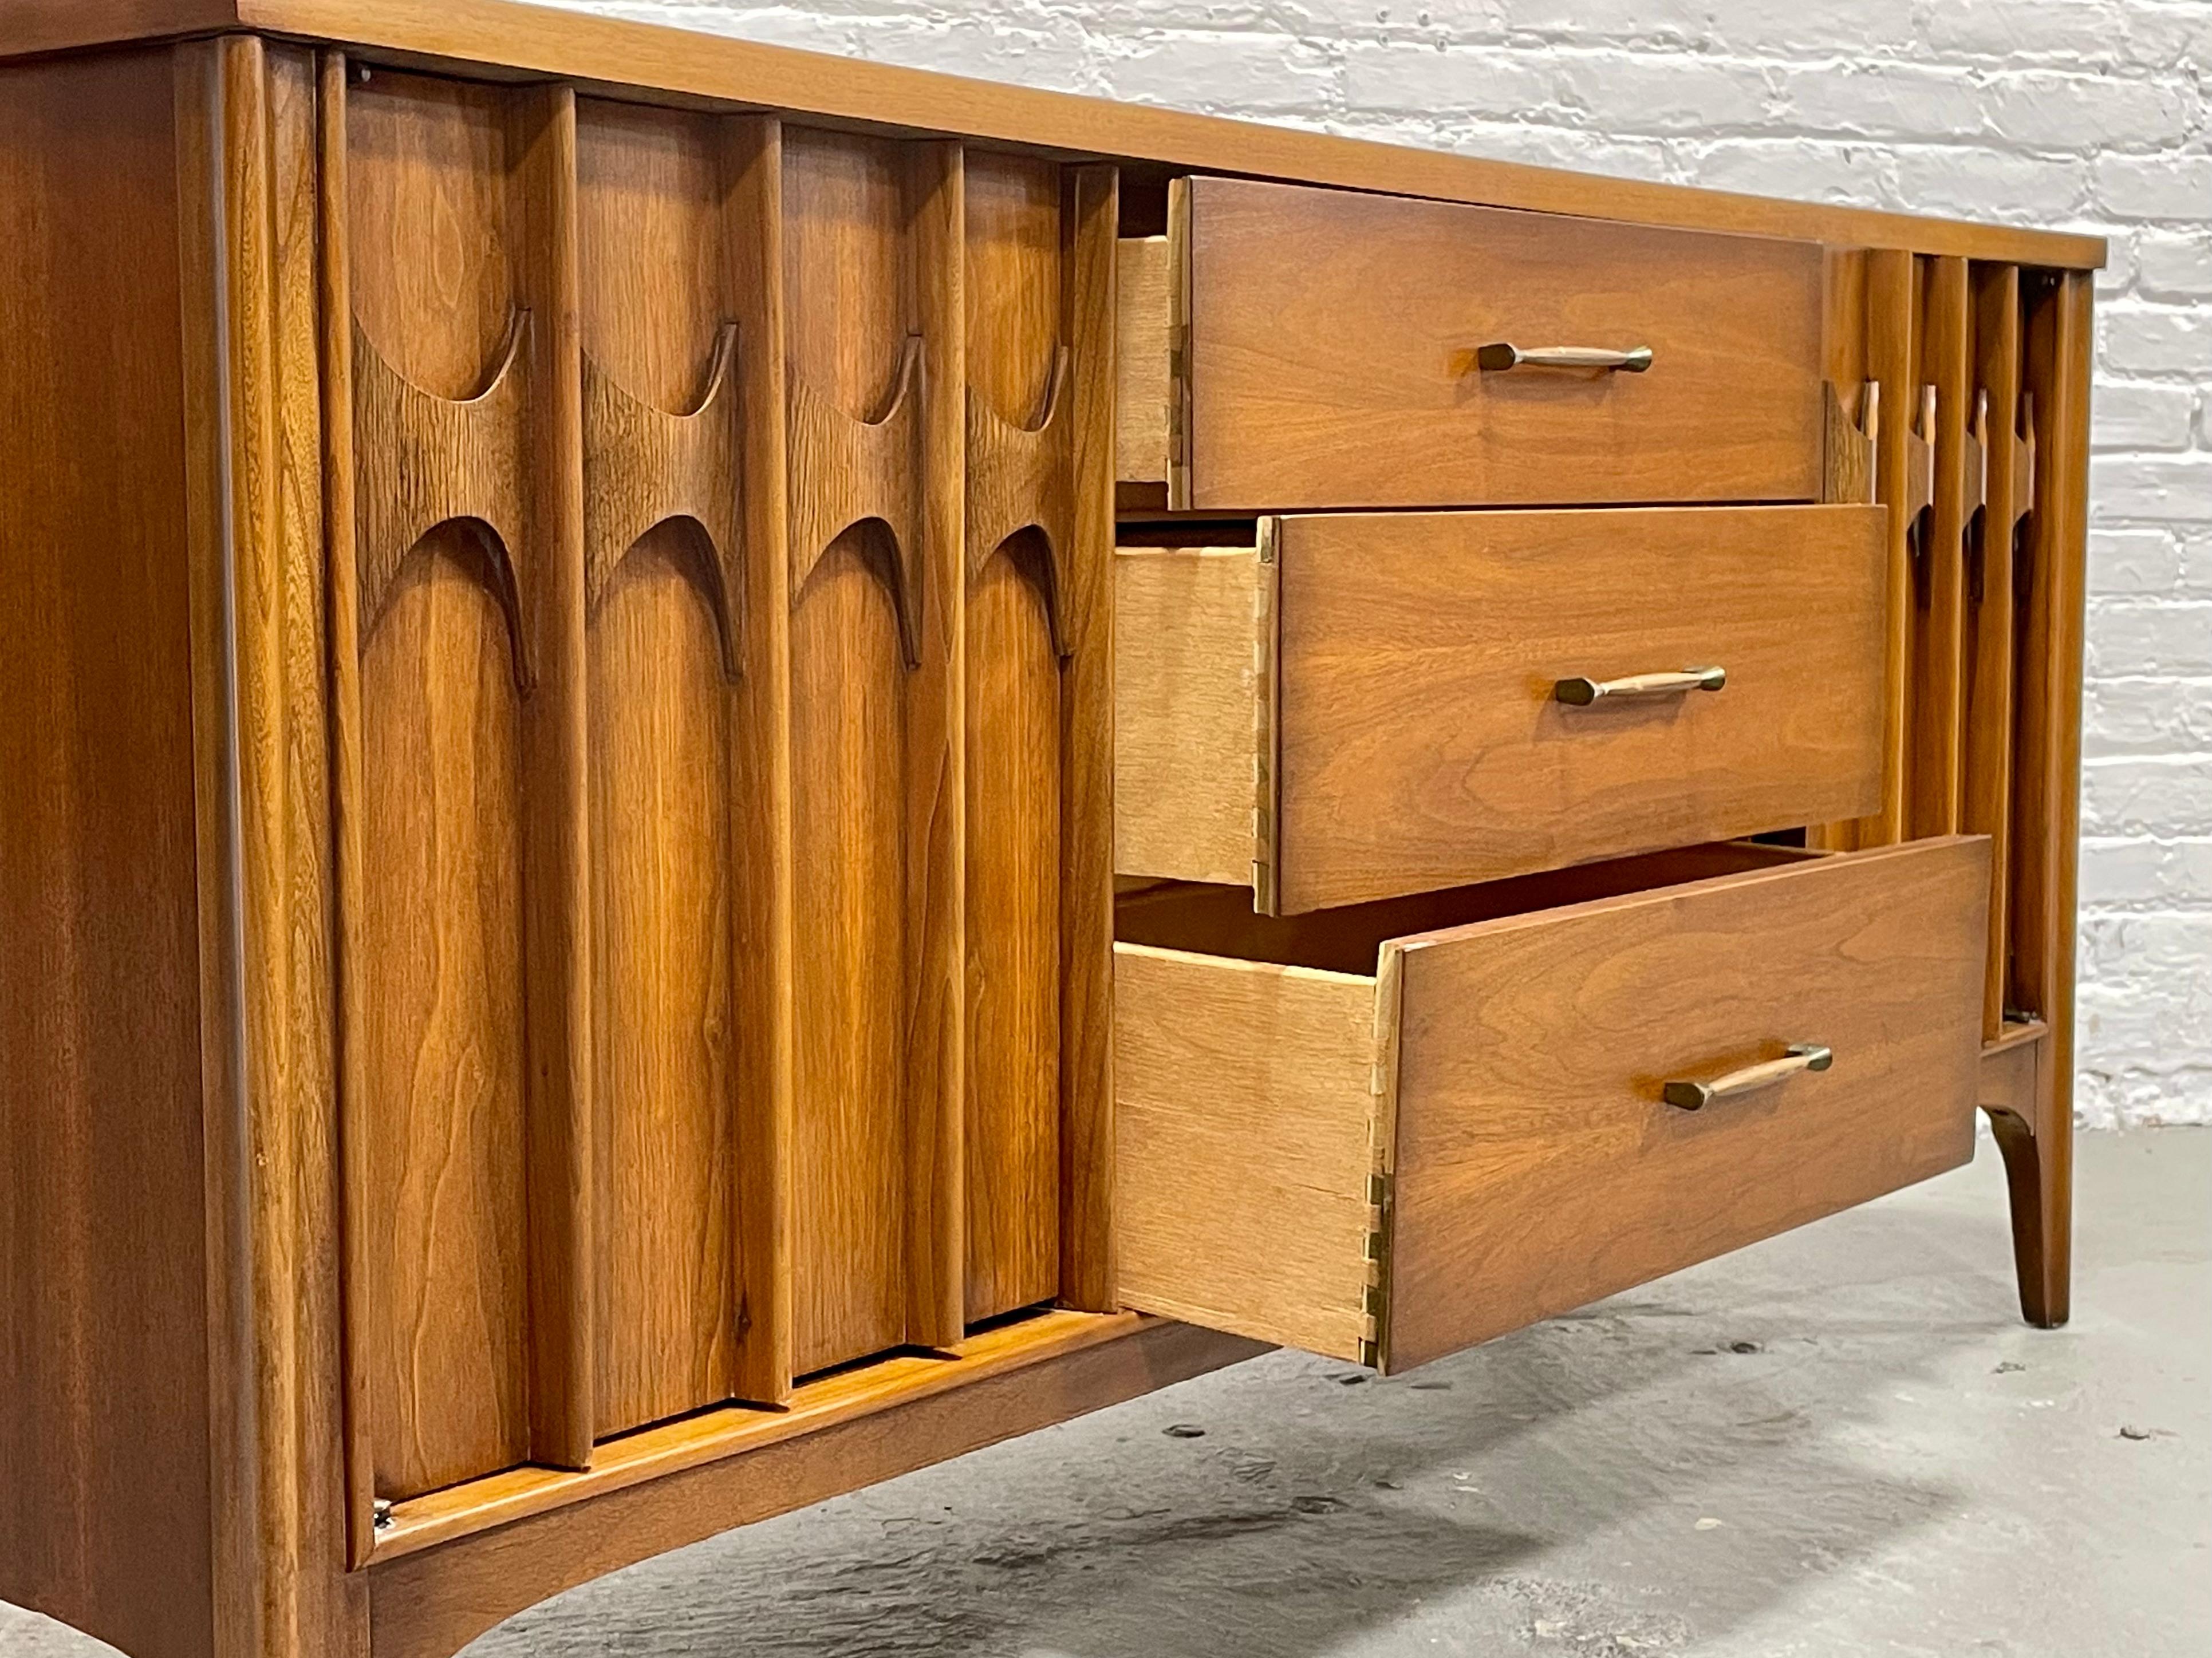 SCULPTED Mid Century MODERN CREDENZA / Long Dresser by Kent Coffey Perspecta, c. 2